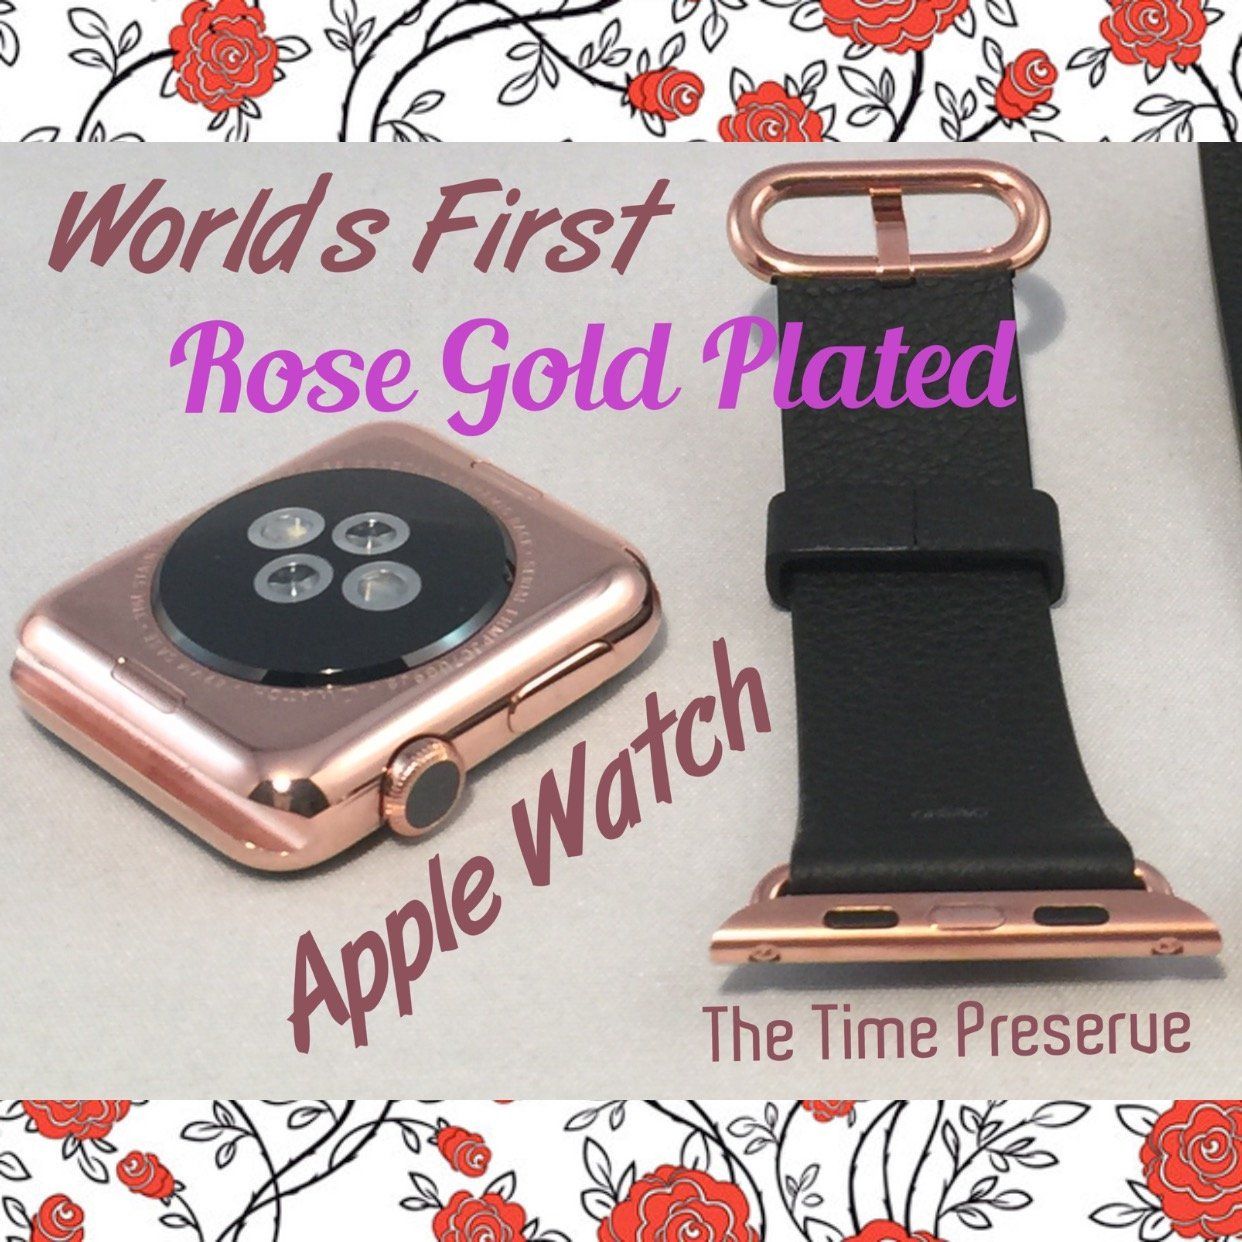 rose gold apple watch the time preserve